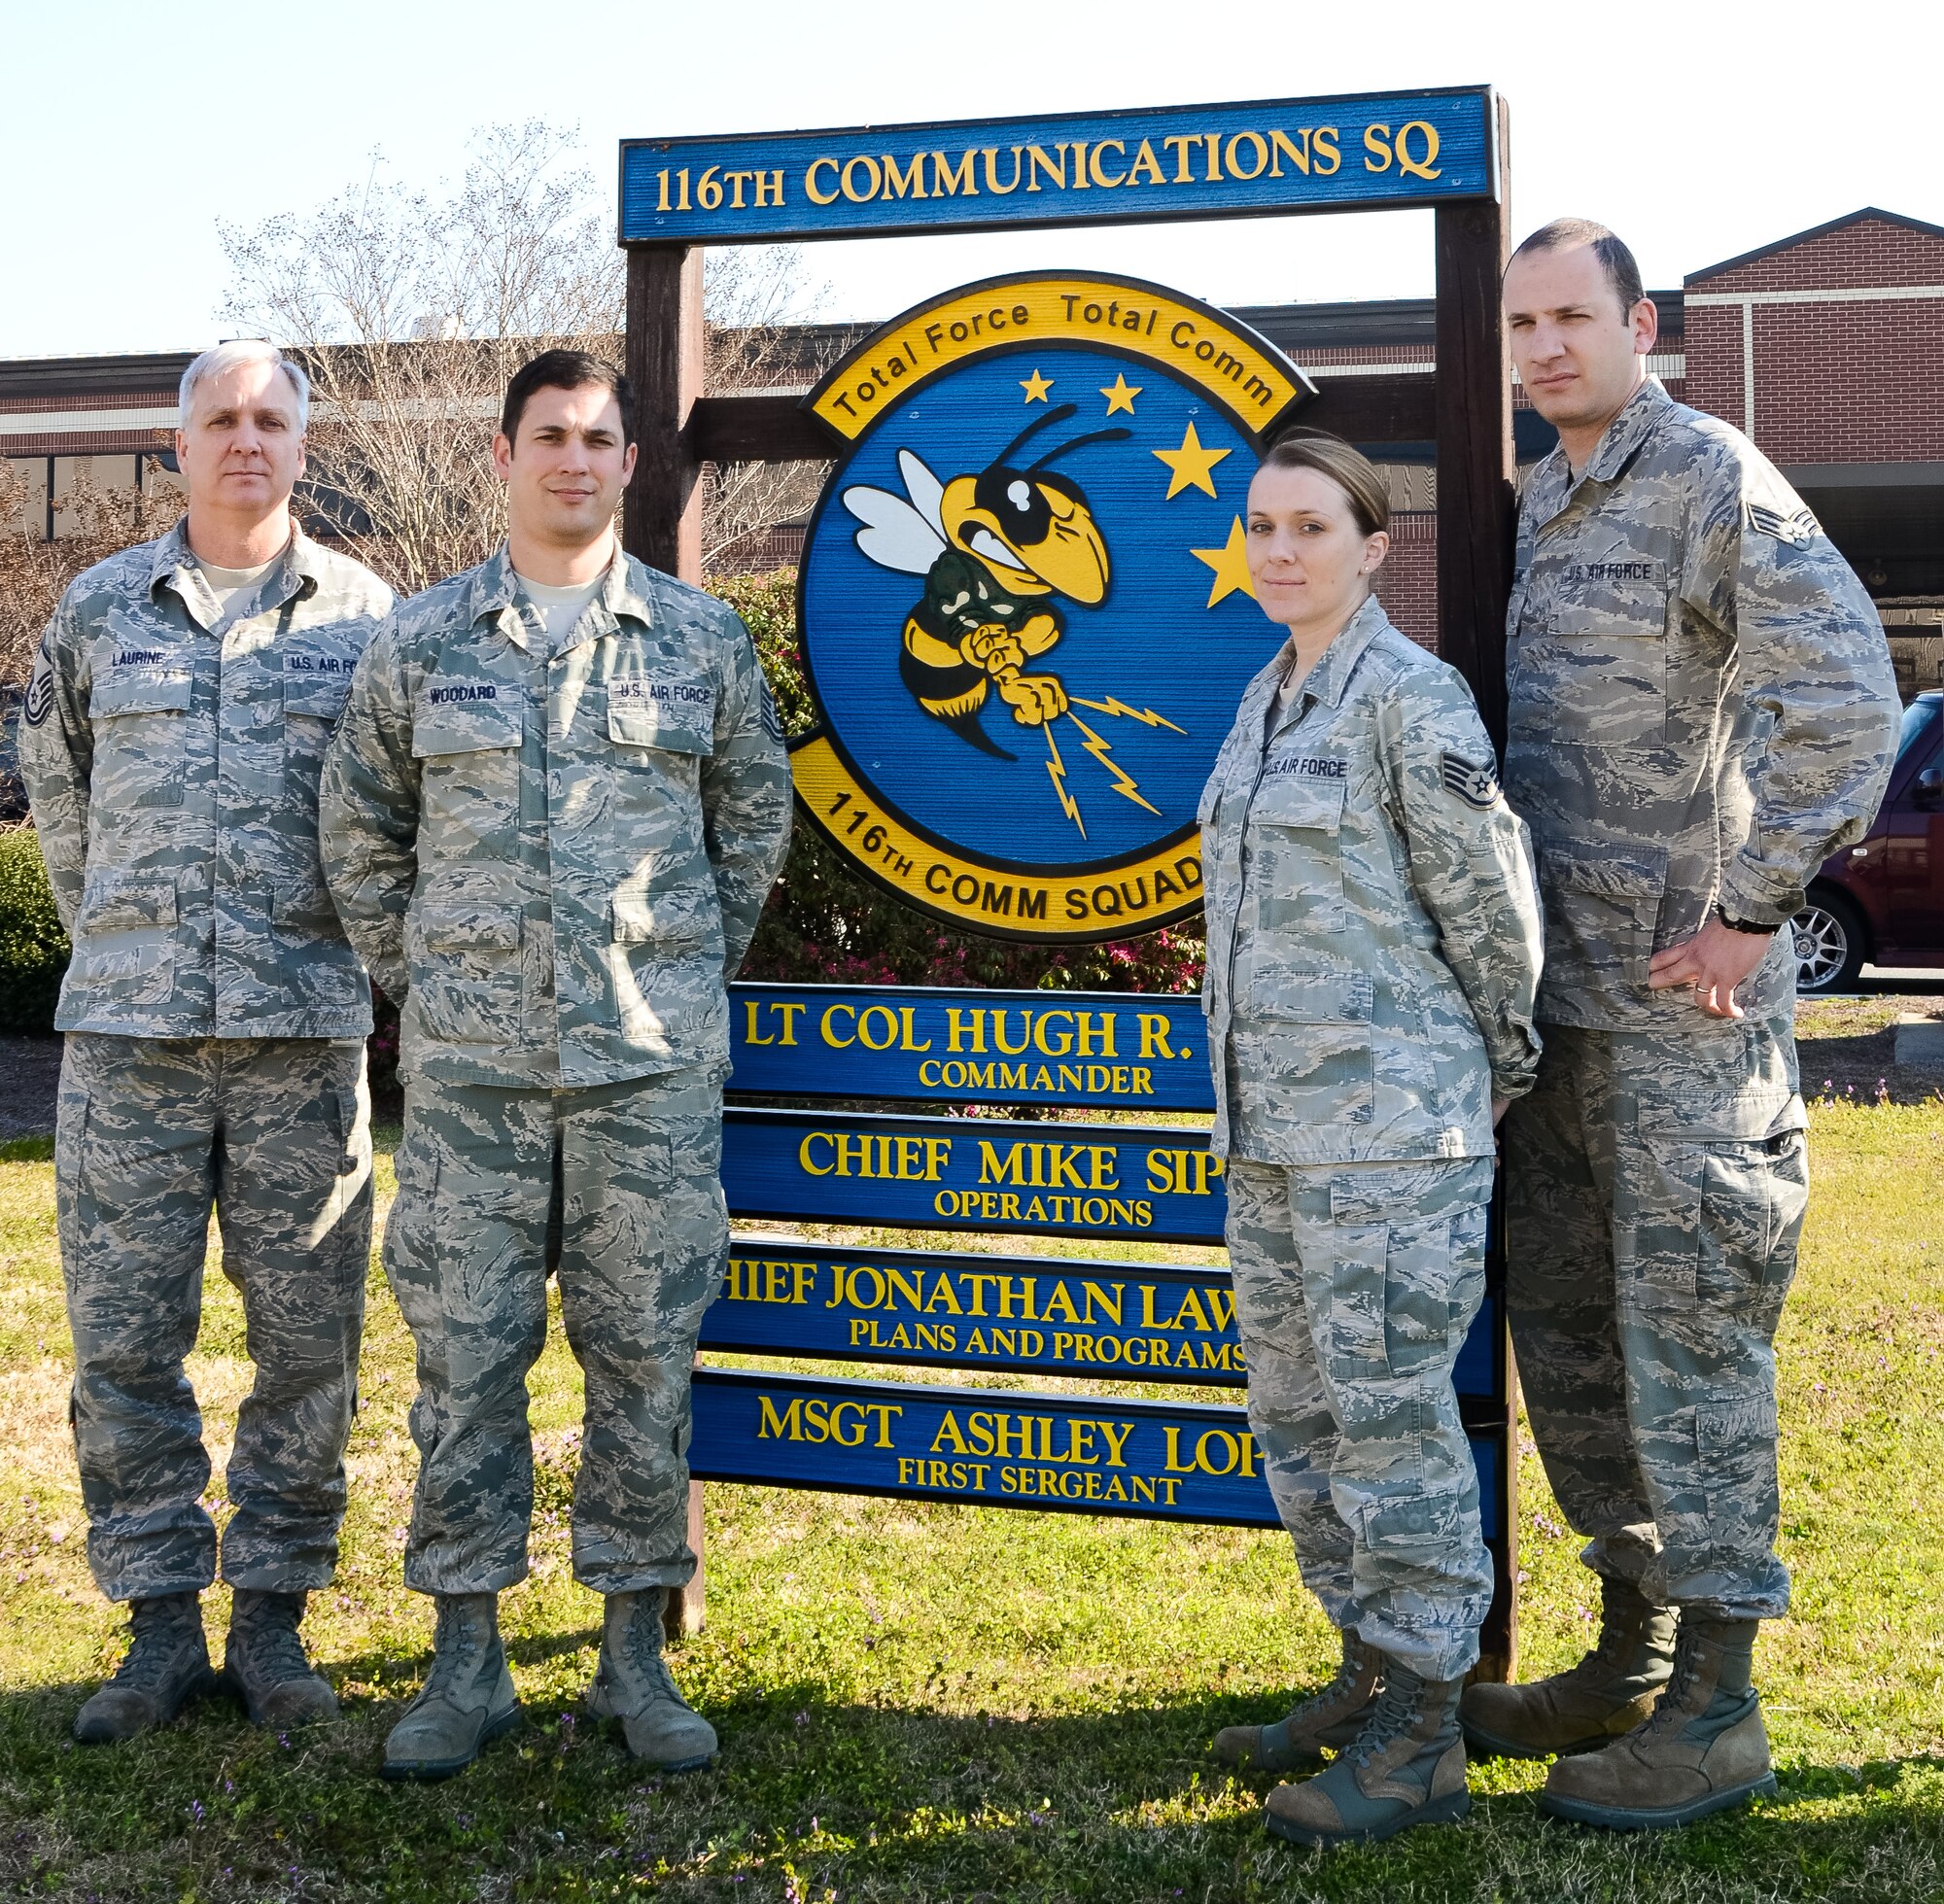 Members of the 116th Air Control Wing's communications squadron who won the Air National Guard Information Dominance and Functional Awards, pose for a group photo in front of their work center at Robins Air Force Base, Ga., March 15, 2013.  The Guardsmen, along with Lt. Col. Hugh Goff, not shown, captured five of 10 national level awards in the Base Communications category.(U.S. Air Force photo by Master Sgt. Roger Parsons/Released)  